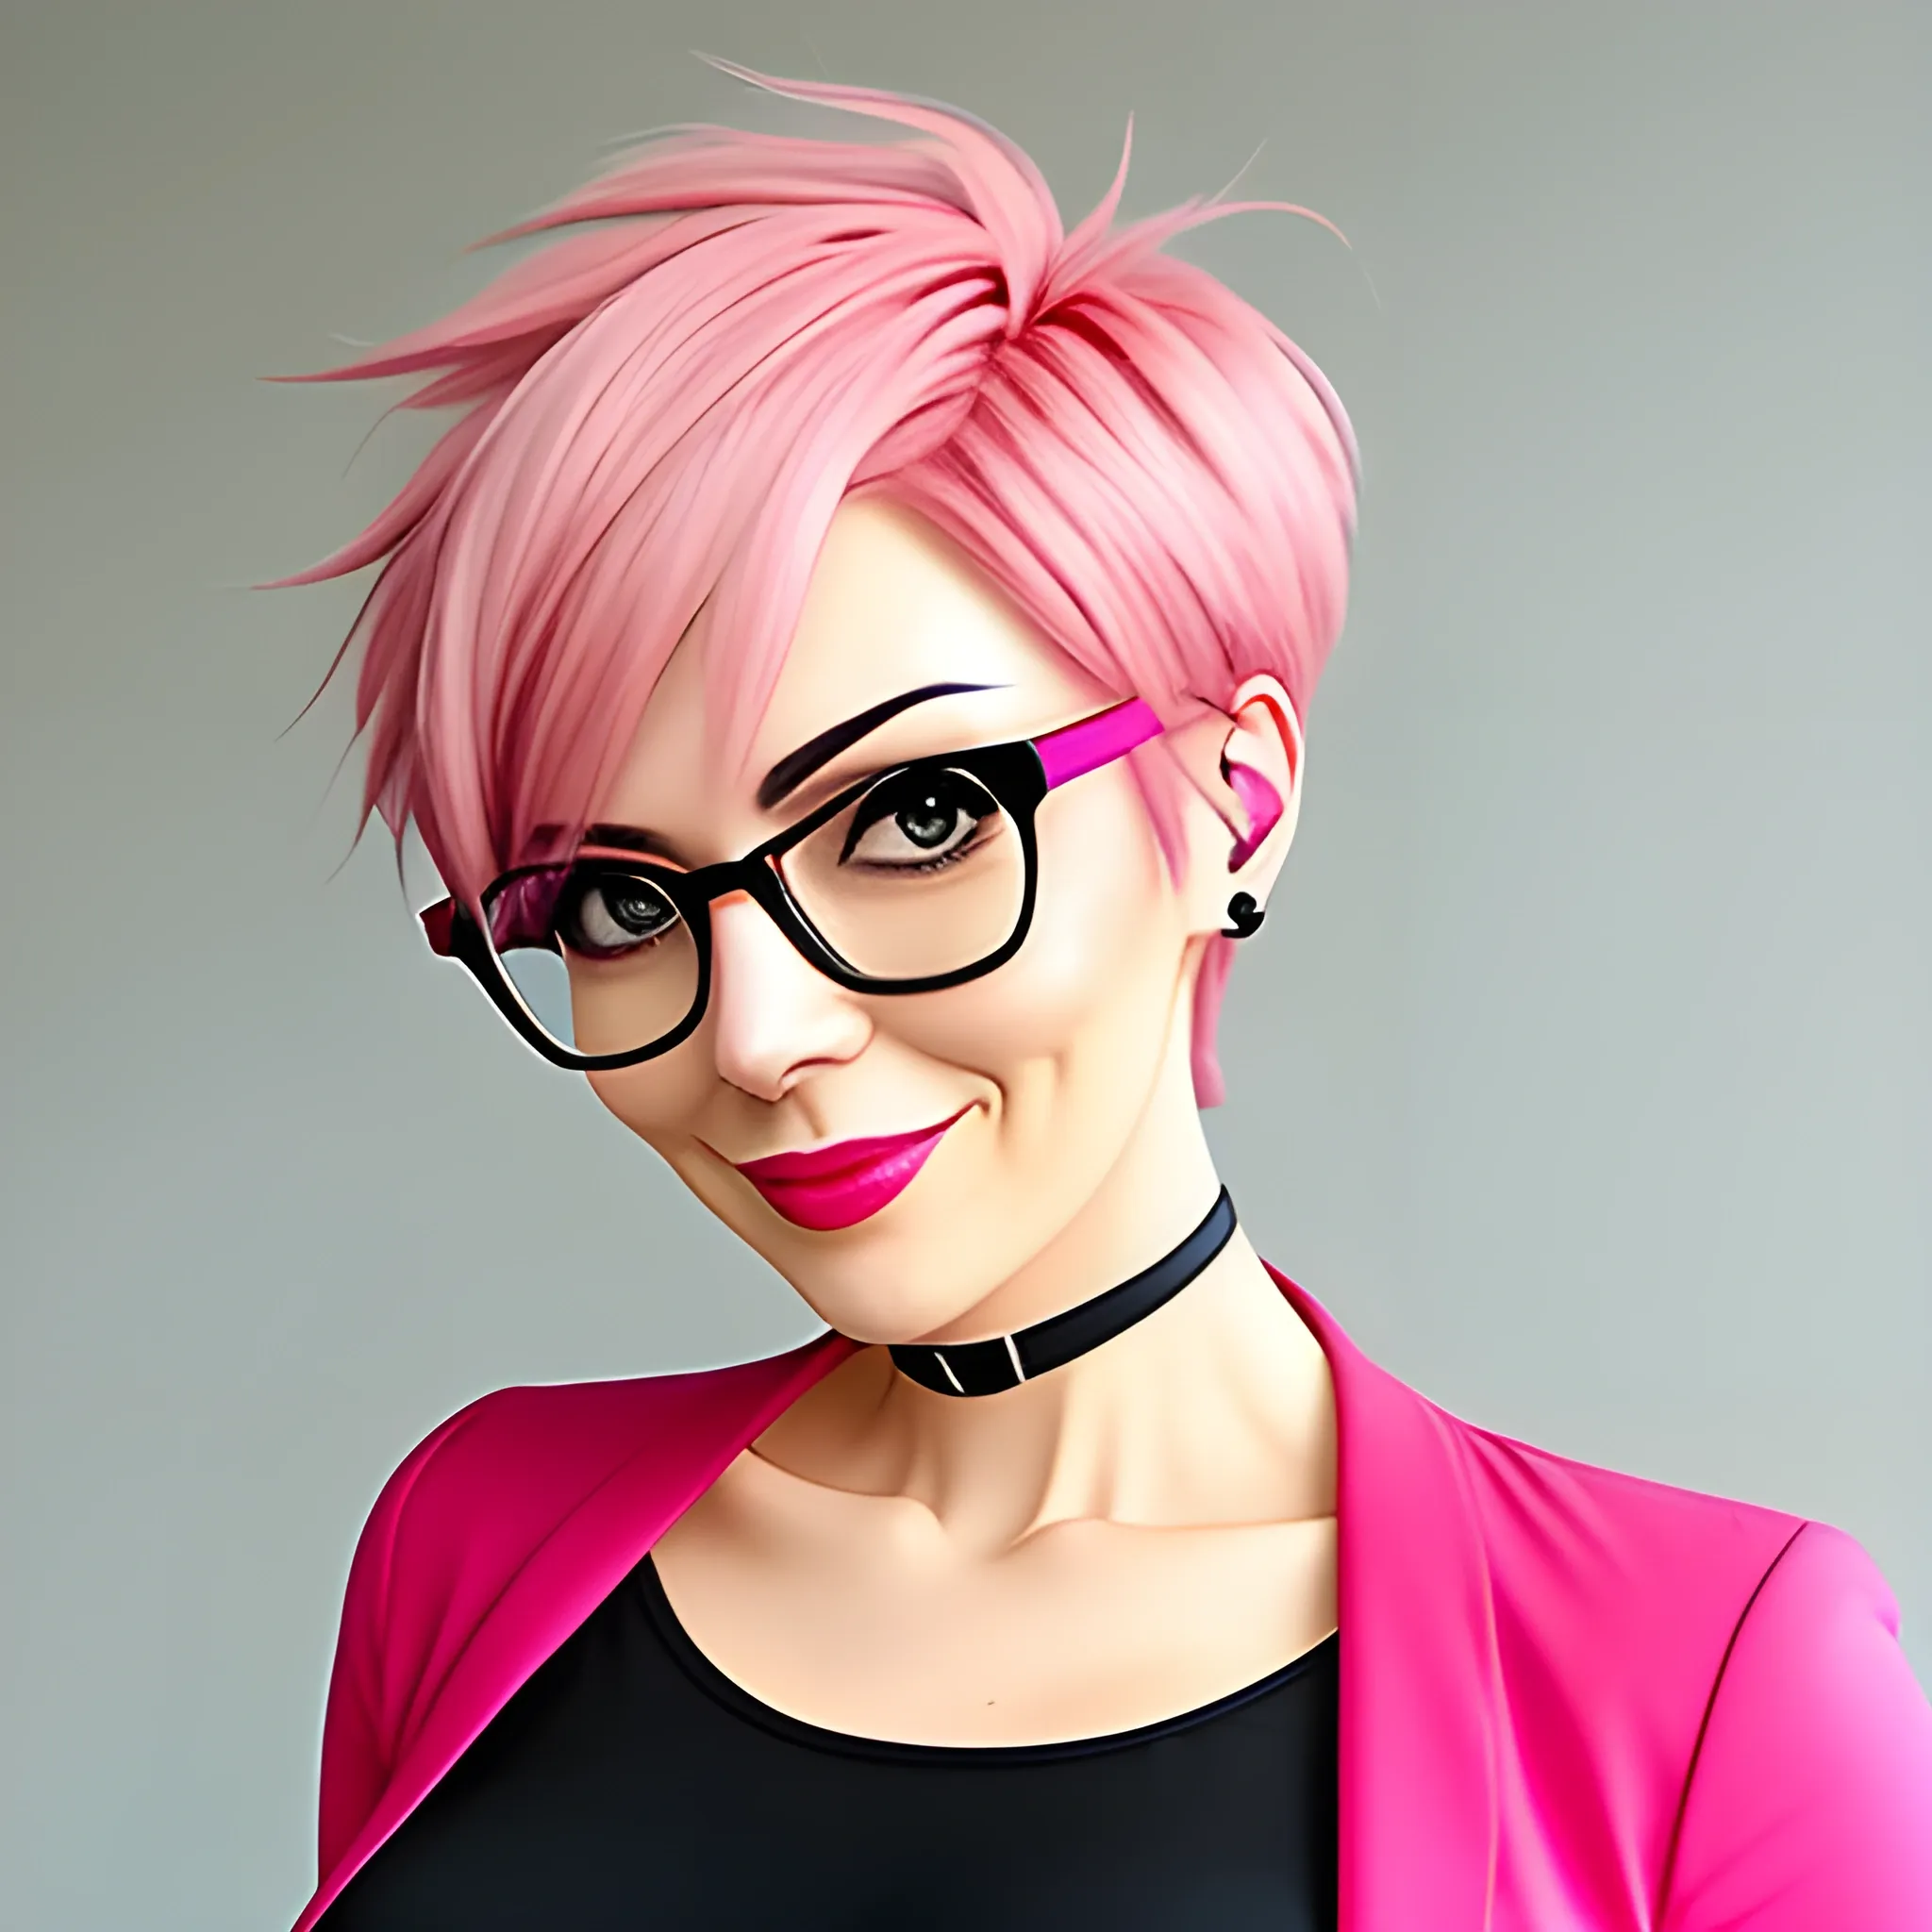 Girl with glasses, short, Pink hair, anime, cute